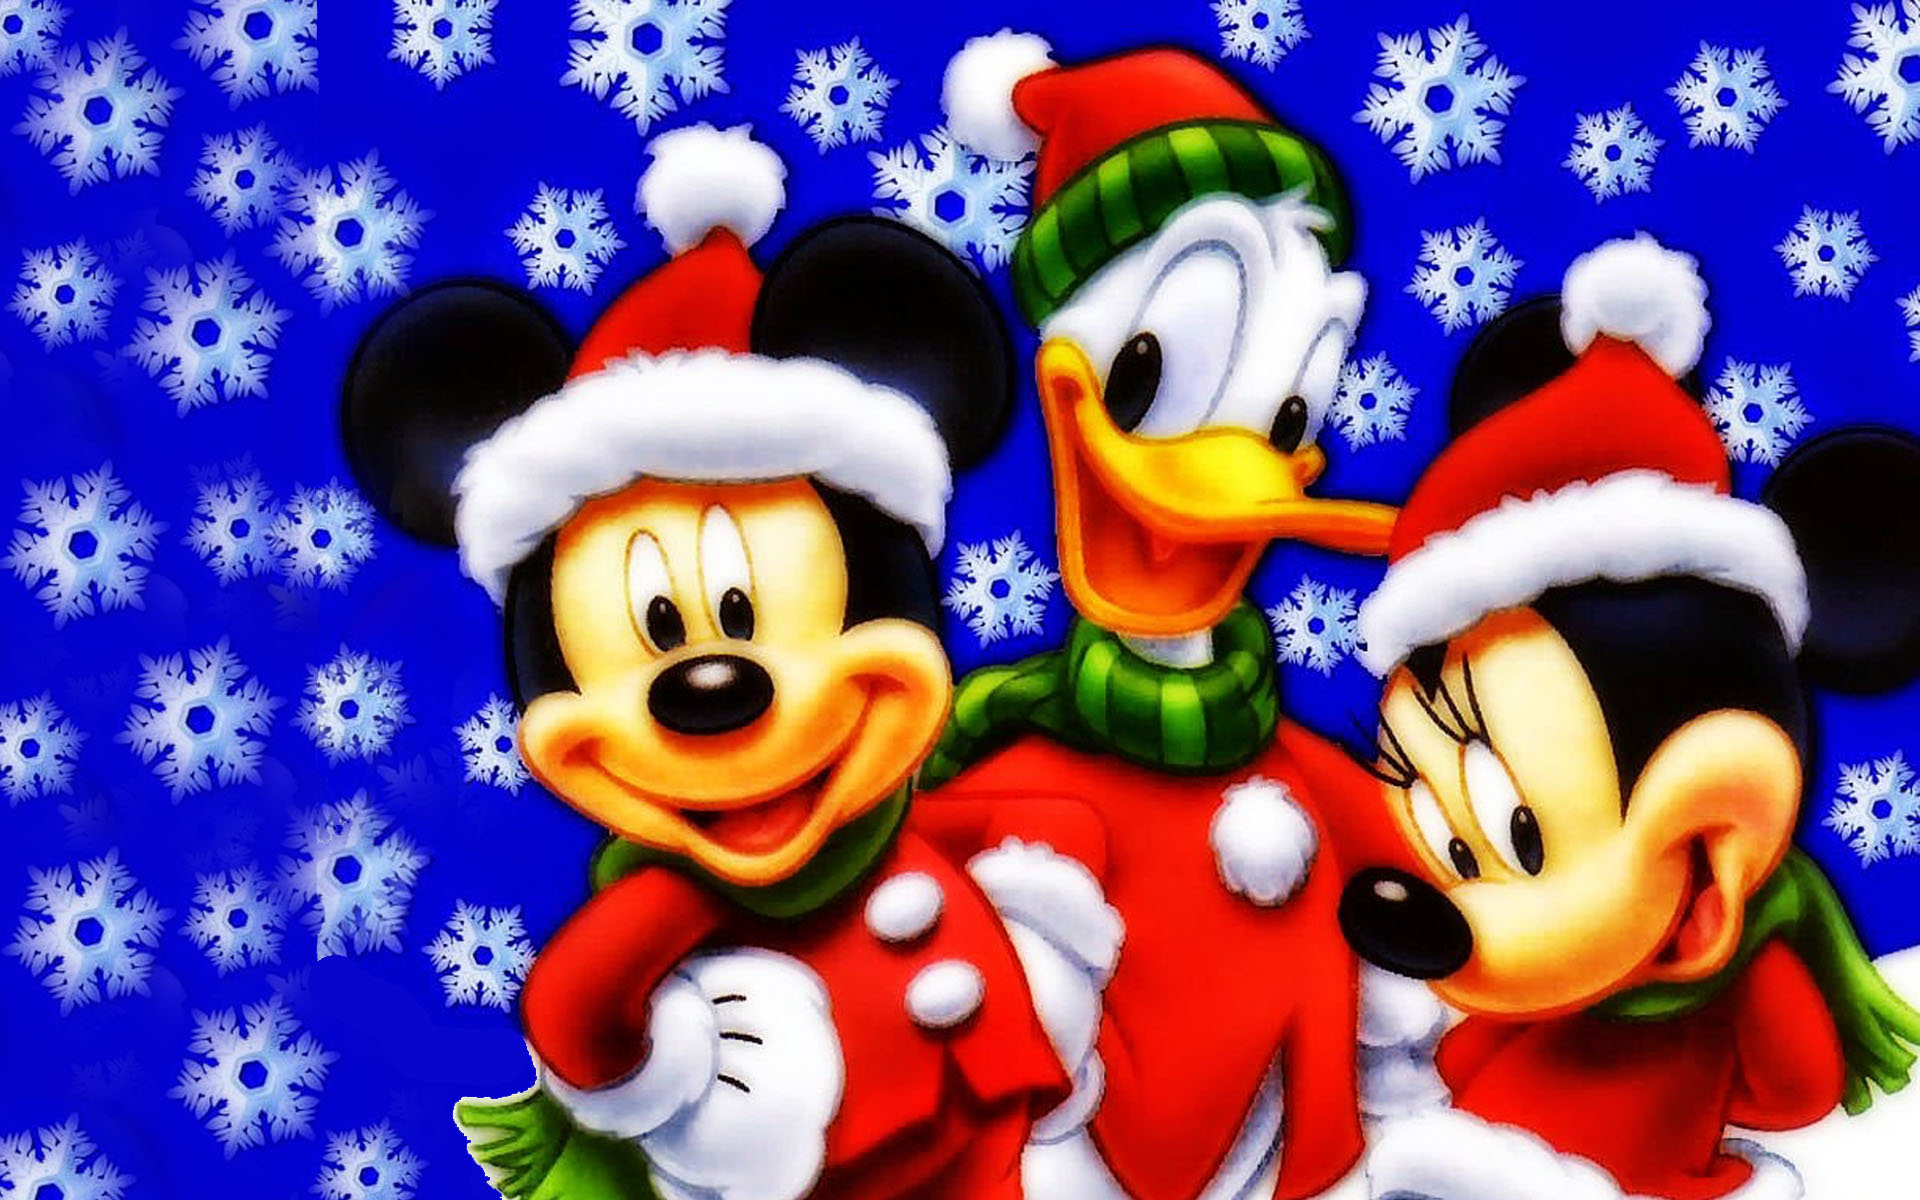 Mickey-Mouse-Donald Duck and Minnie-Christmas-Wallpaper Hd : Wallpapers13.com